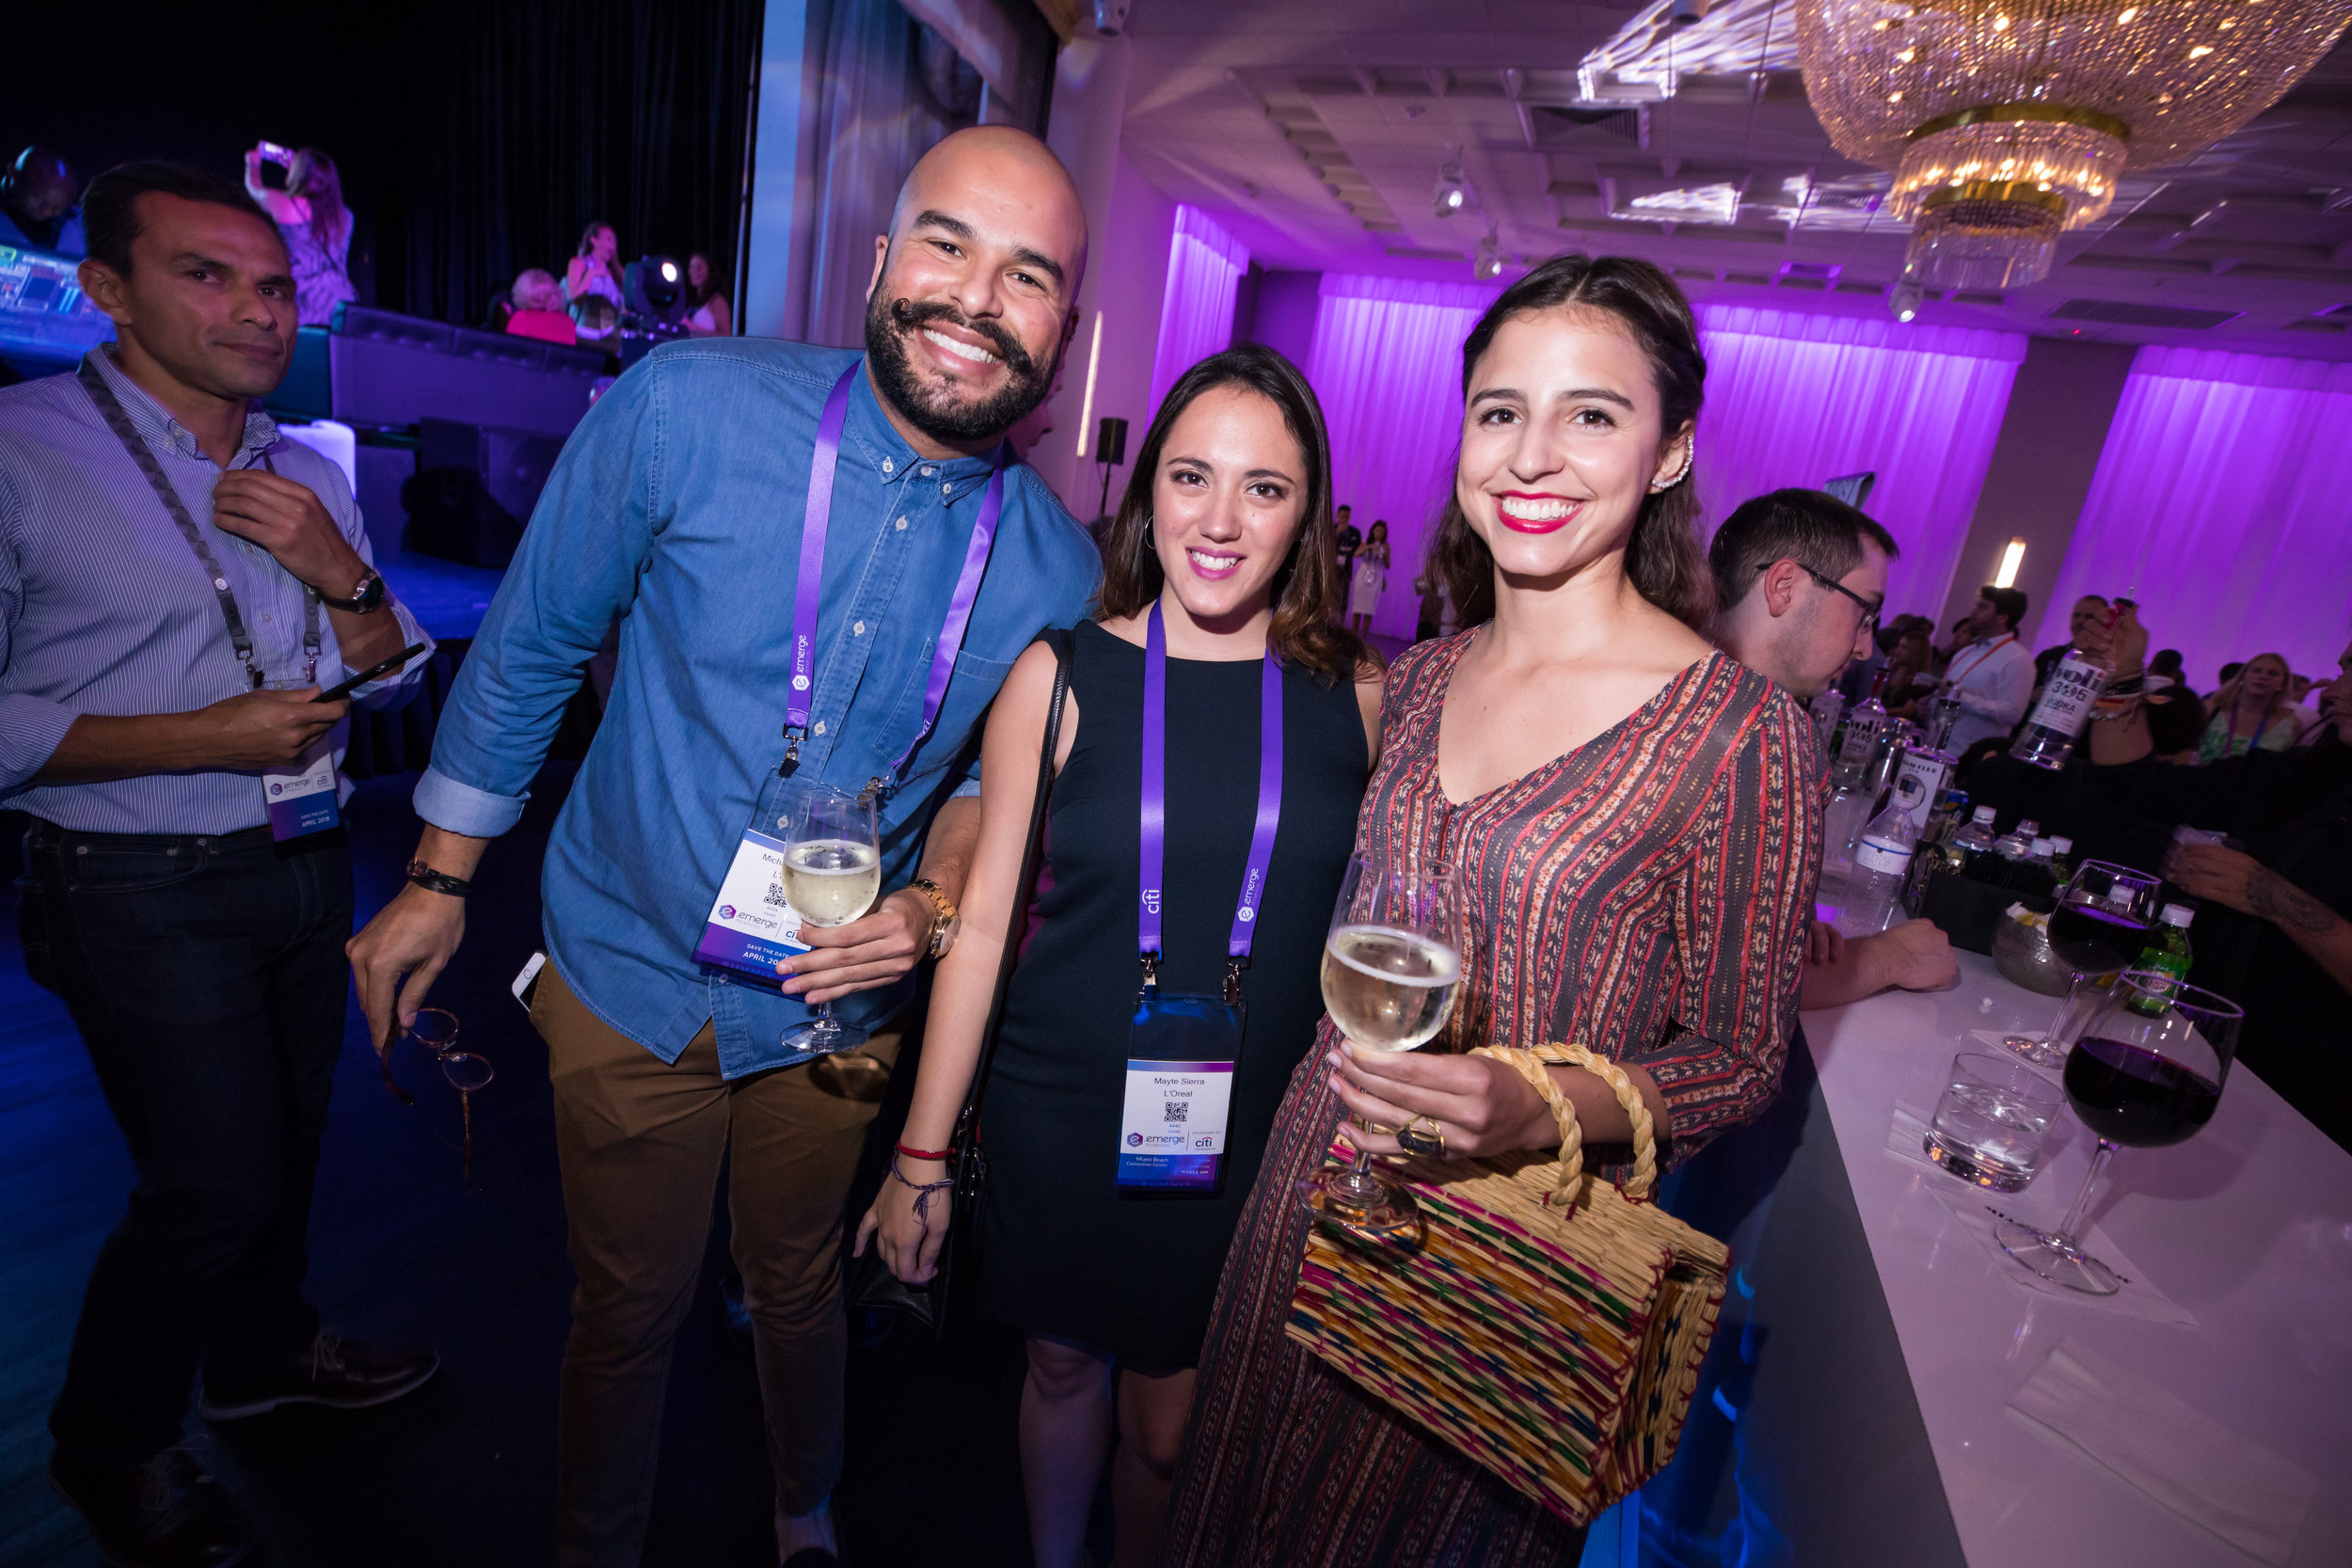 6-11-17 Emerge Opening Party-148.jpg